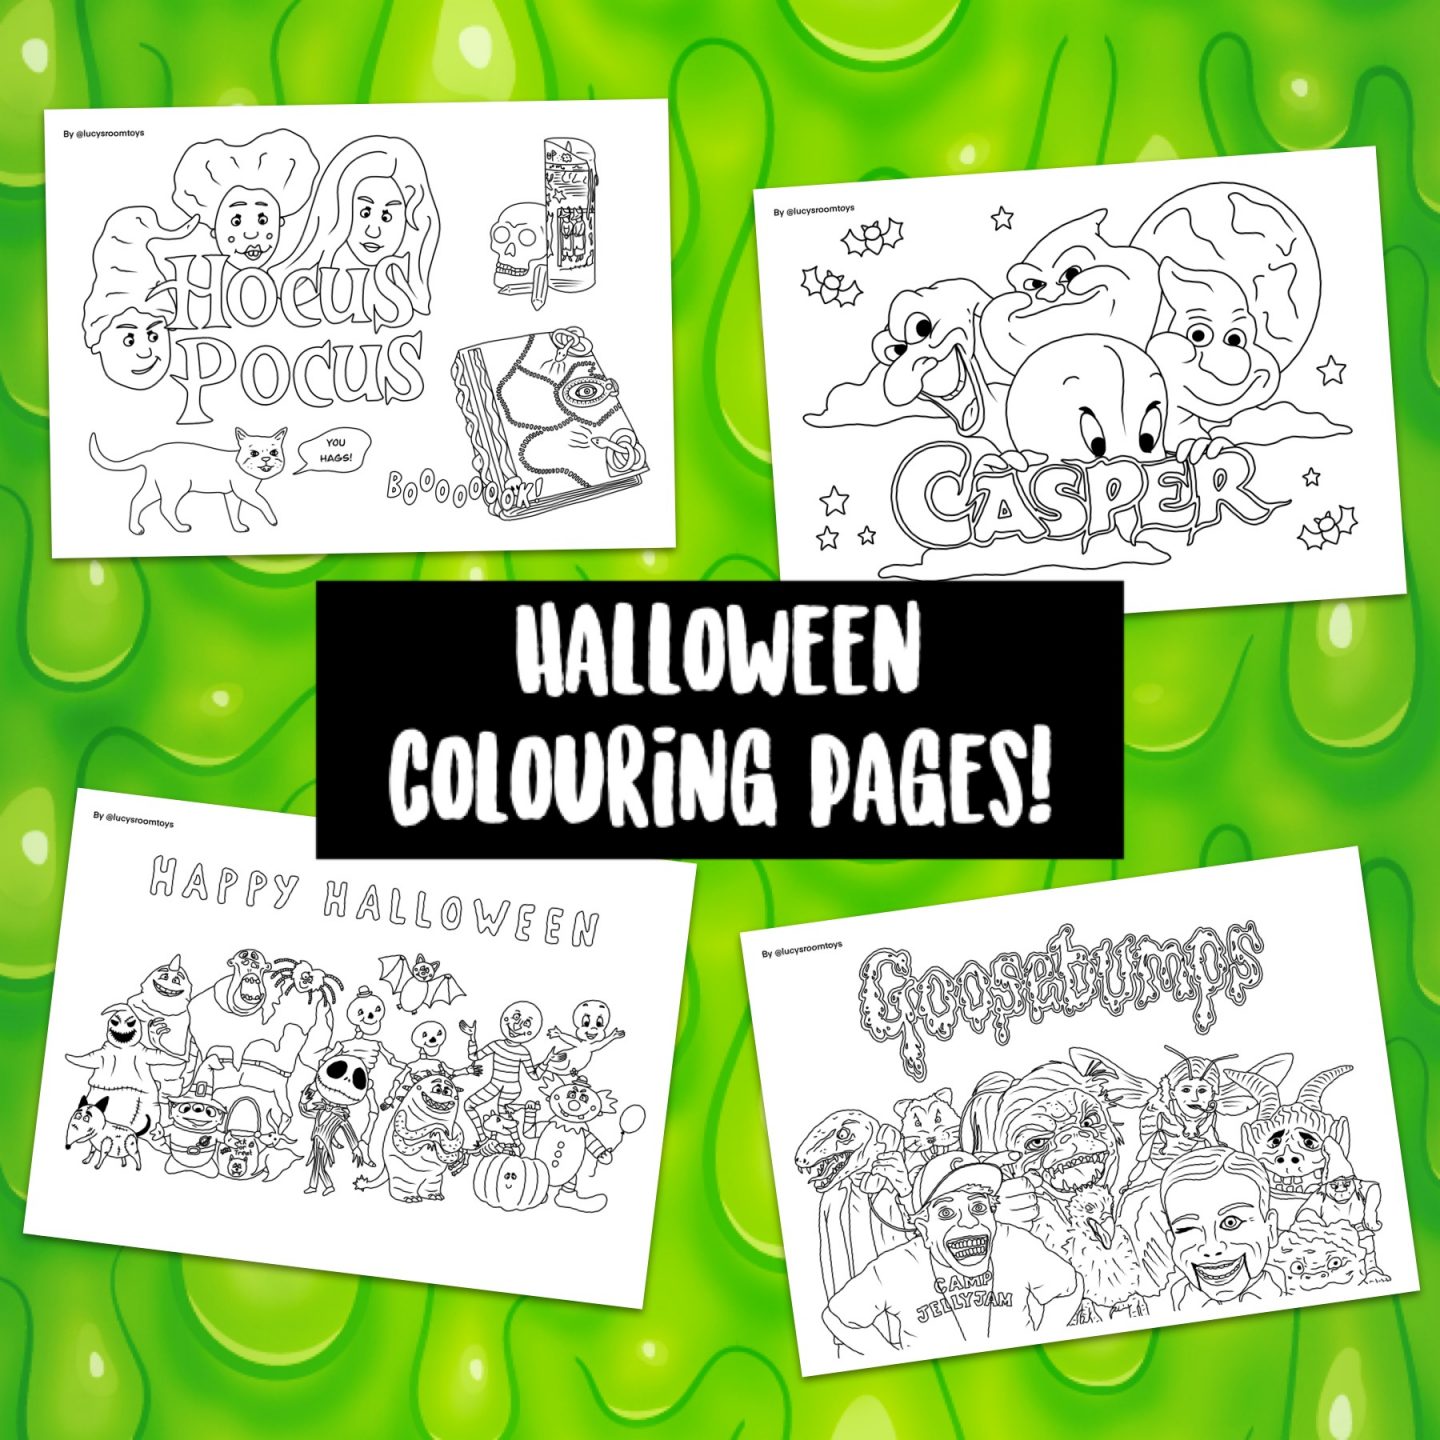 Halloween Colouring Pages!